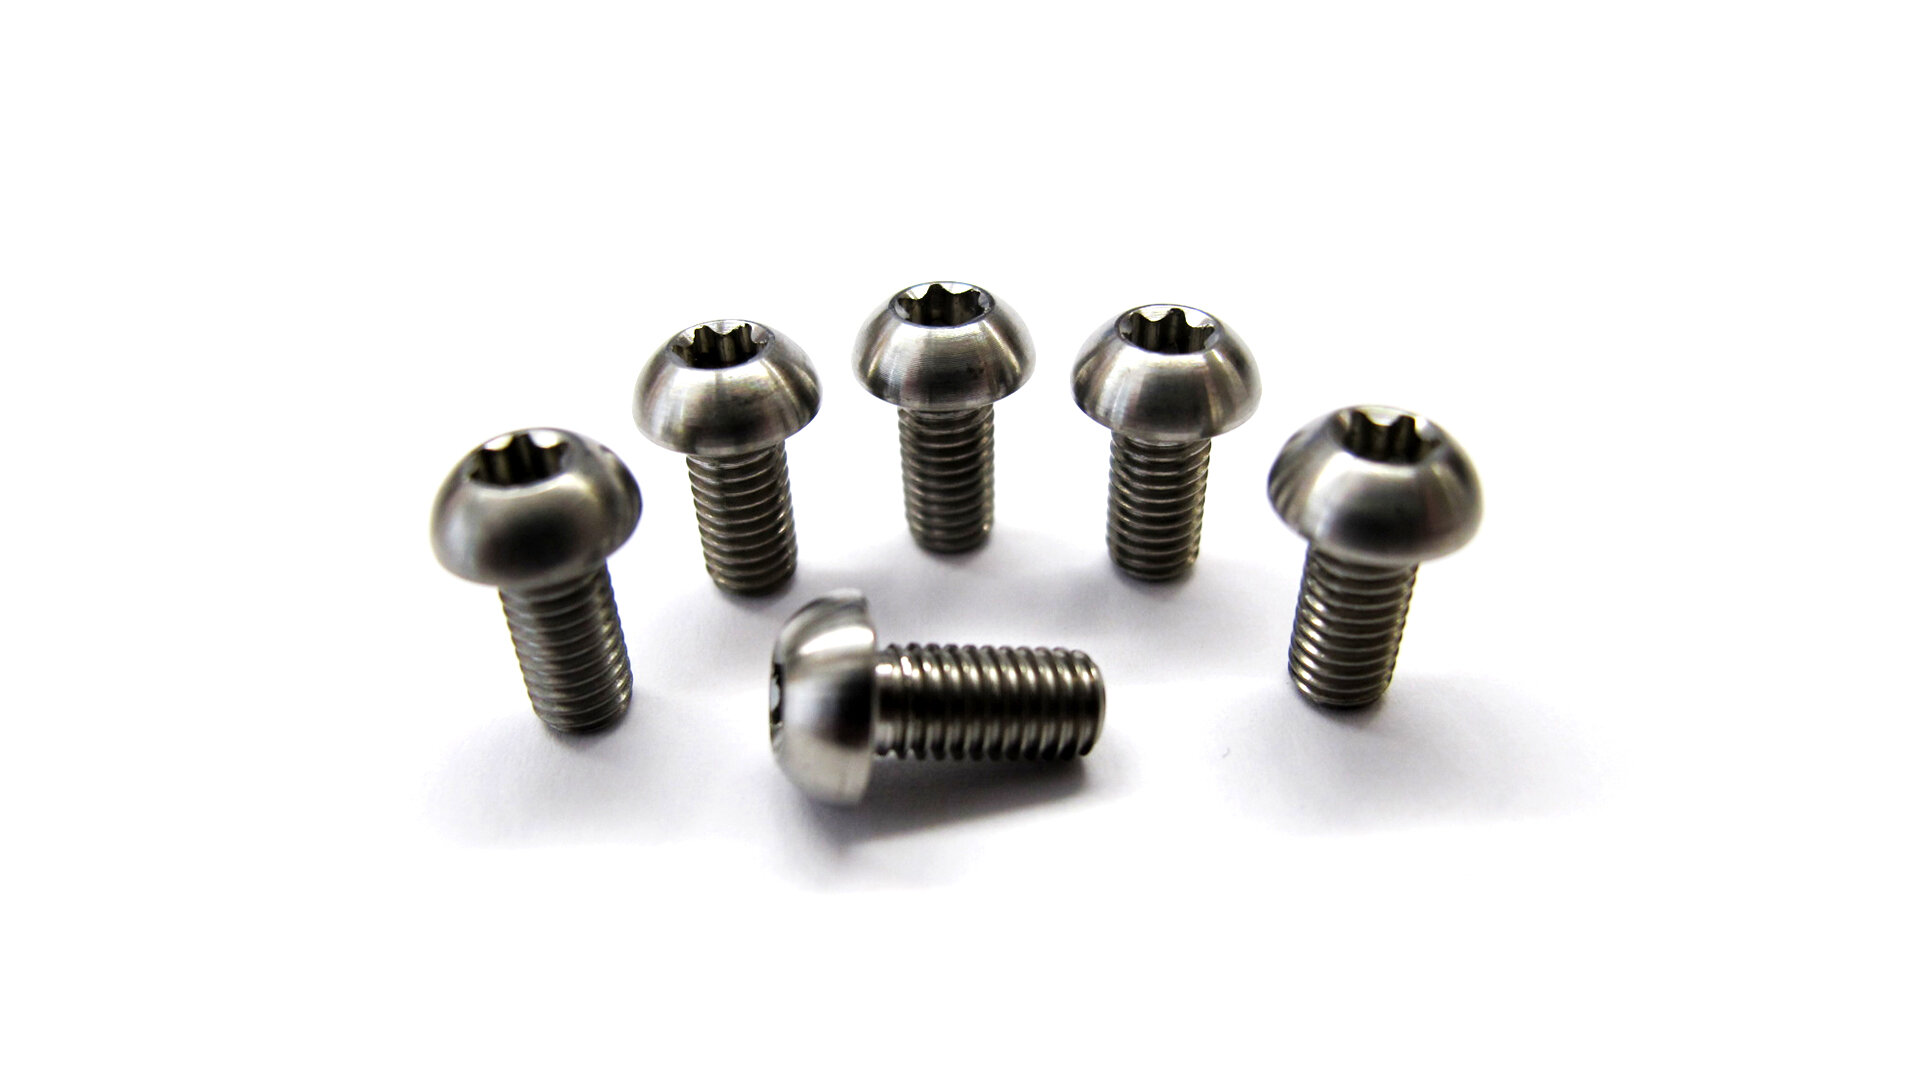 Hardheaded Ram MTB Bolts M5 x 10mm Nylon Anti-Loosen Treated Pack of 6pcs ti-Alloy Works on disc Brakes Water Bottle.Plus Bicycle Cable Organizer Free.